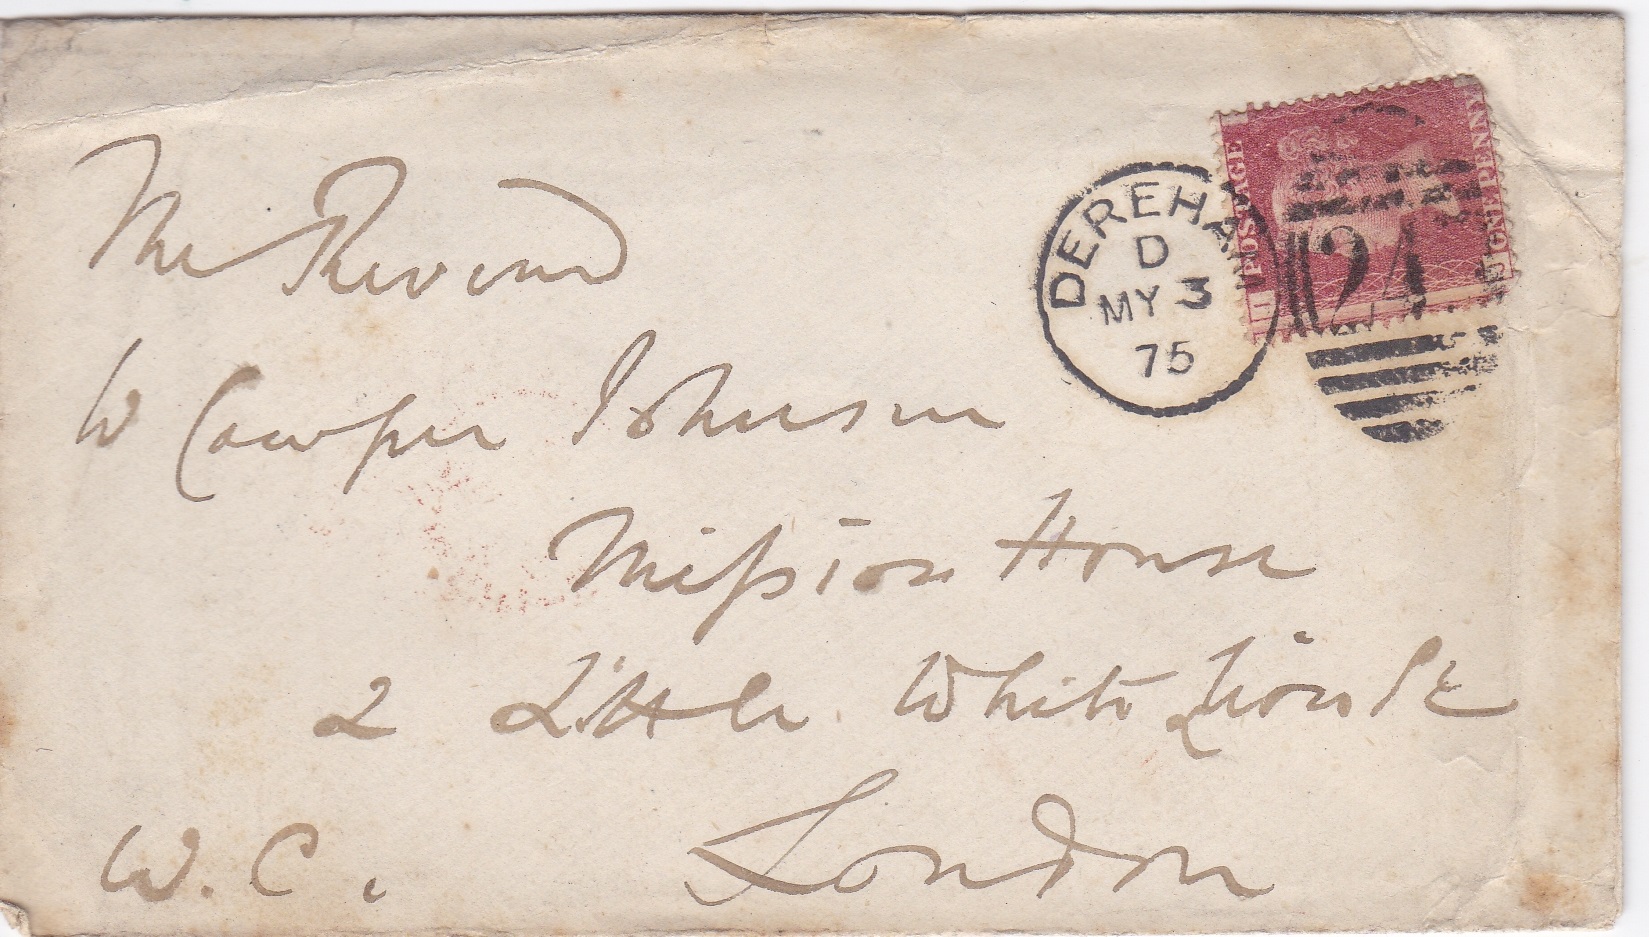 Great Britain-1875 Envelope posted to London cancelled 3.5.1875 with Dereham cds and 245 numeral